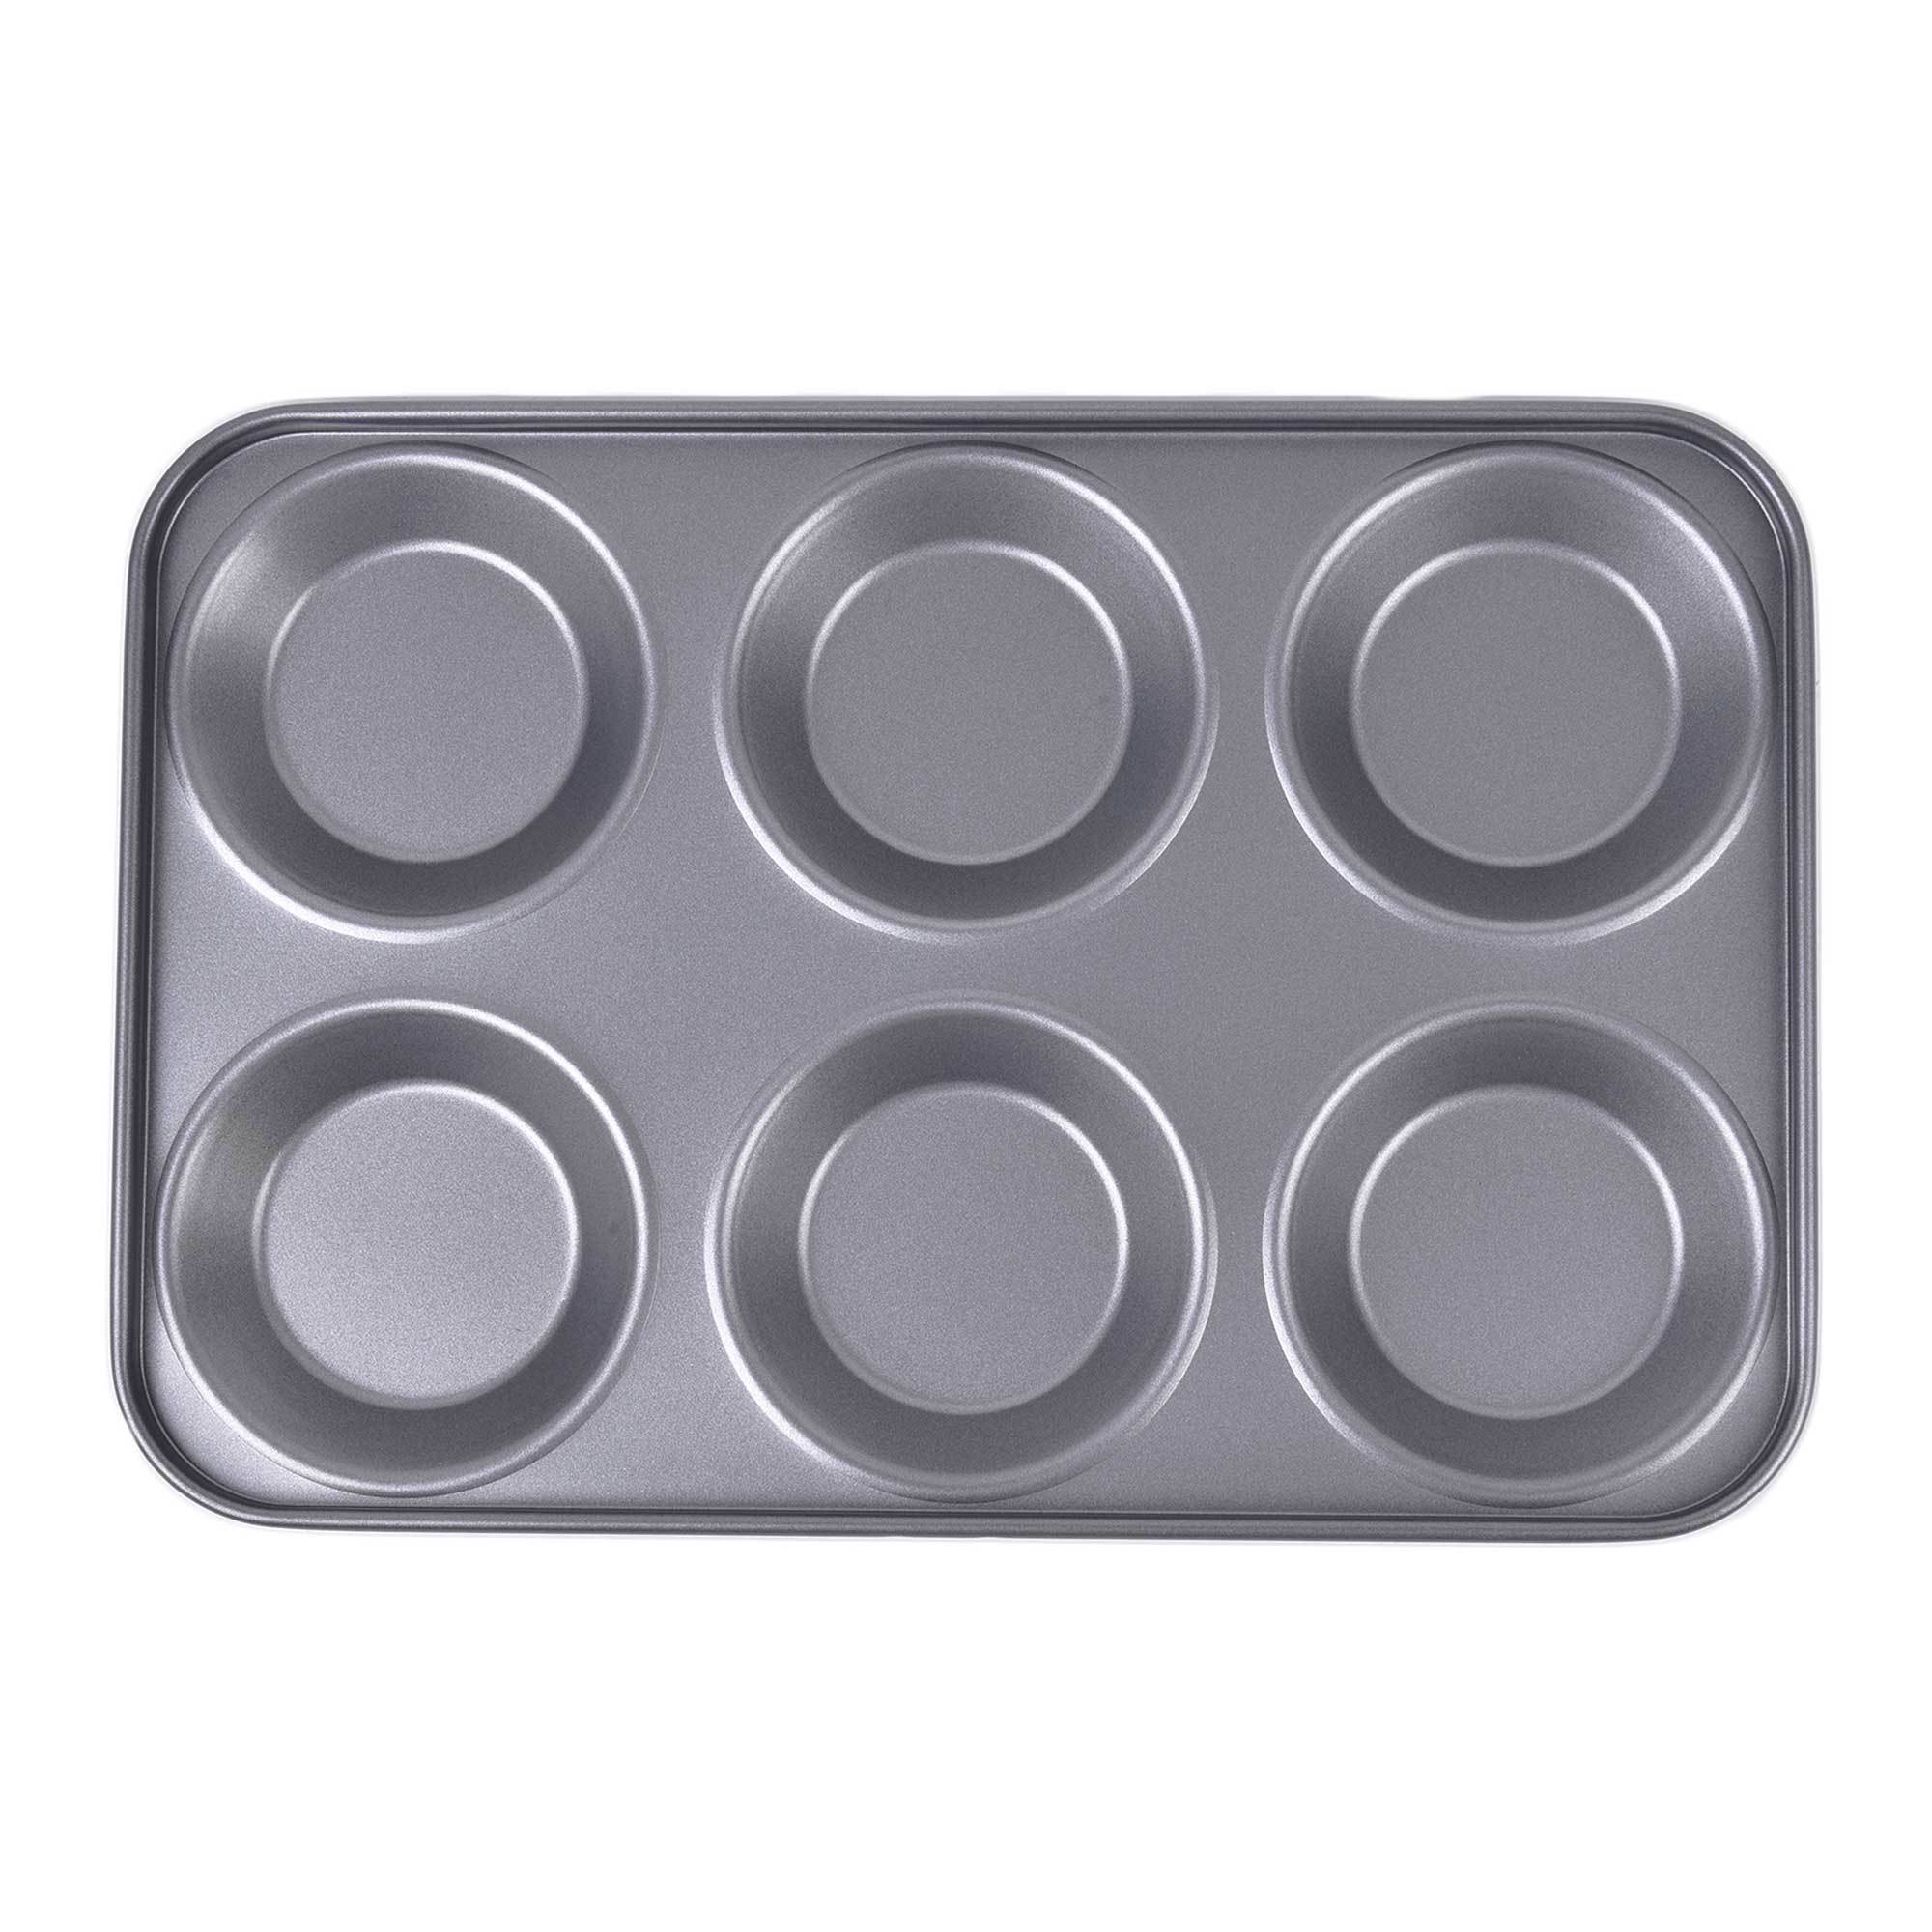 6Cup Yorkshire Pudding Pan 3231-21